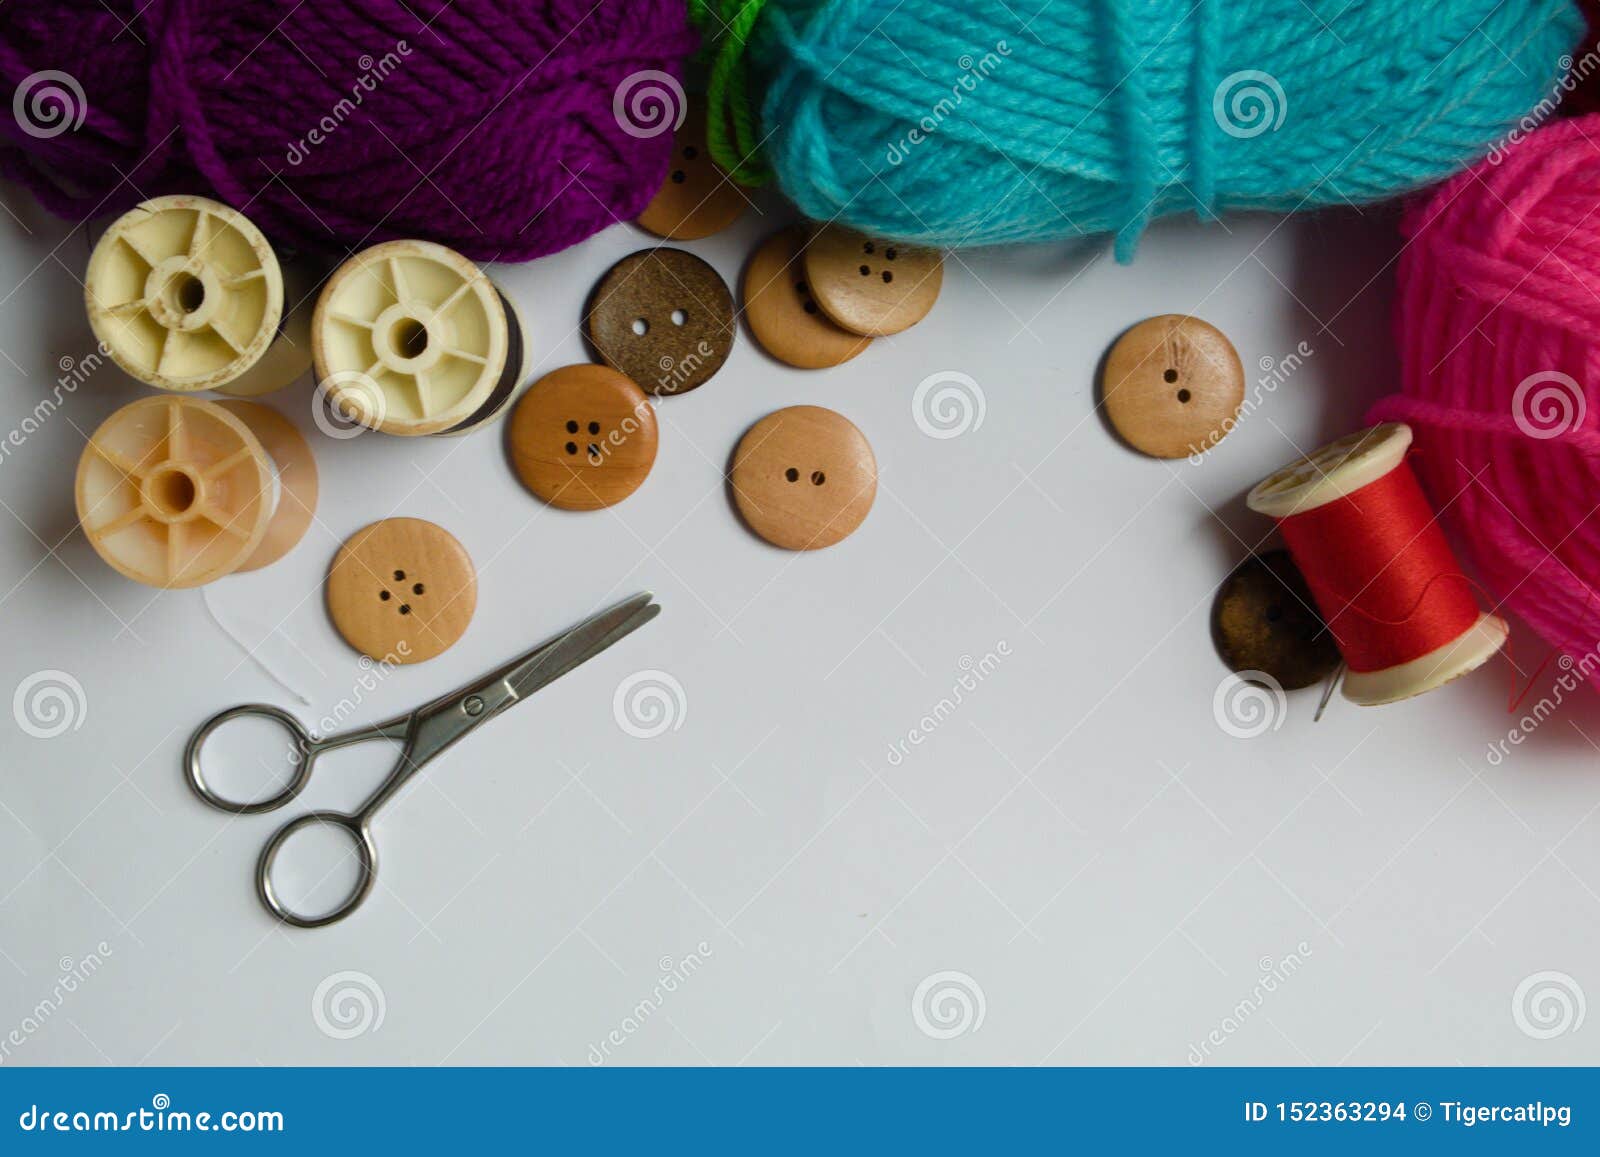 Embroidery Accessories for a Variety of Colors, Such As Yarn, Needle and  Buttons Brought Together Stock Photo - Image of buttons, fashion: 152363294